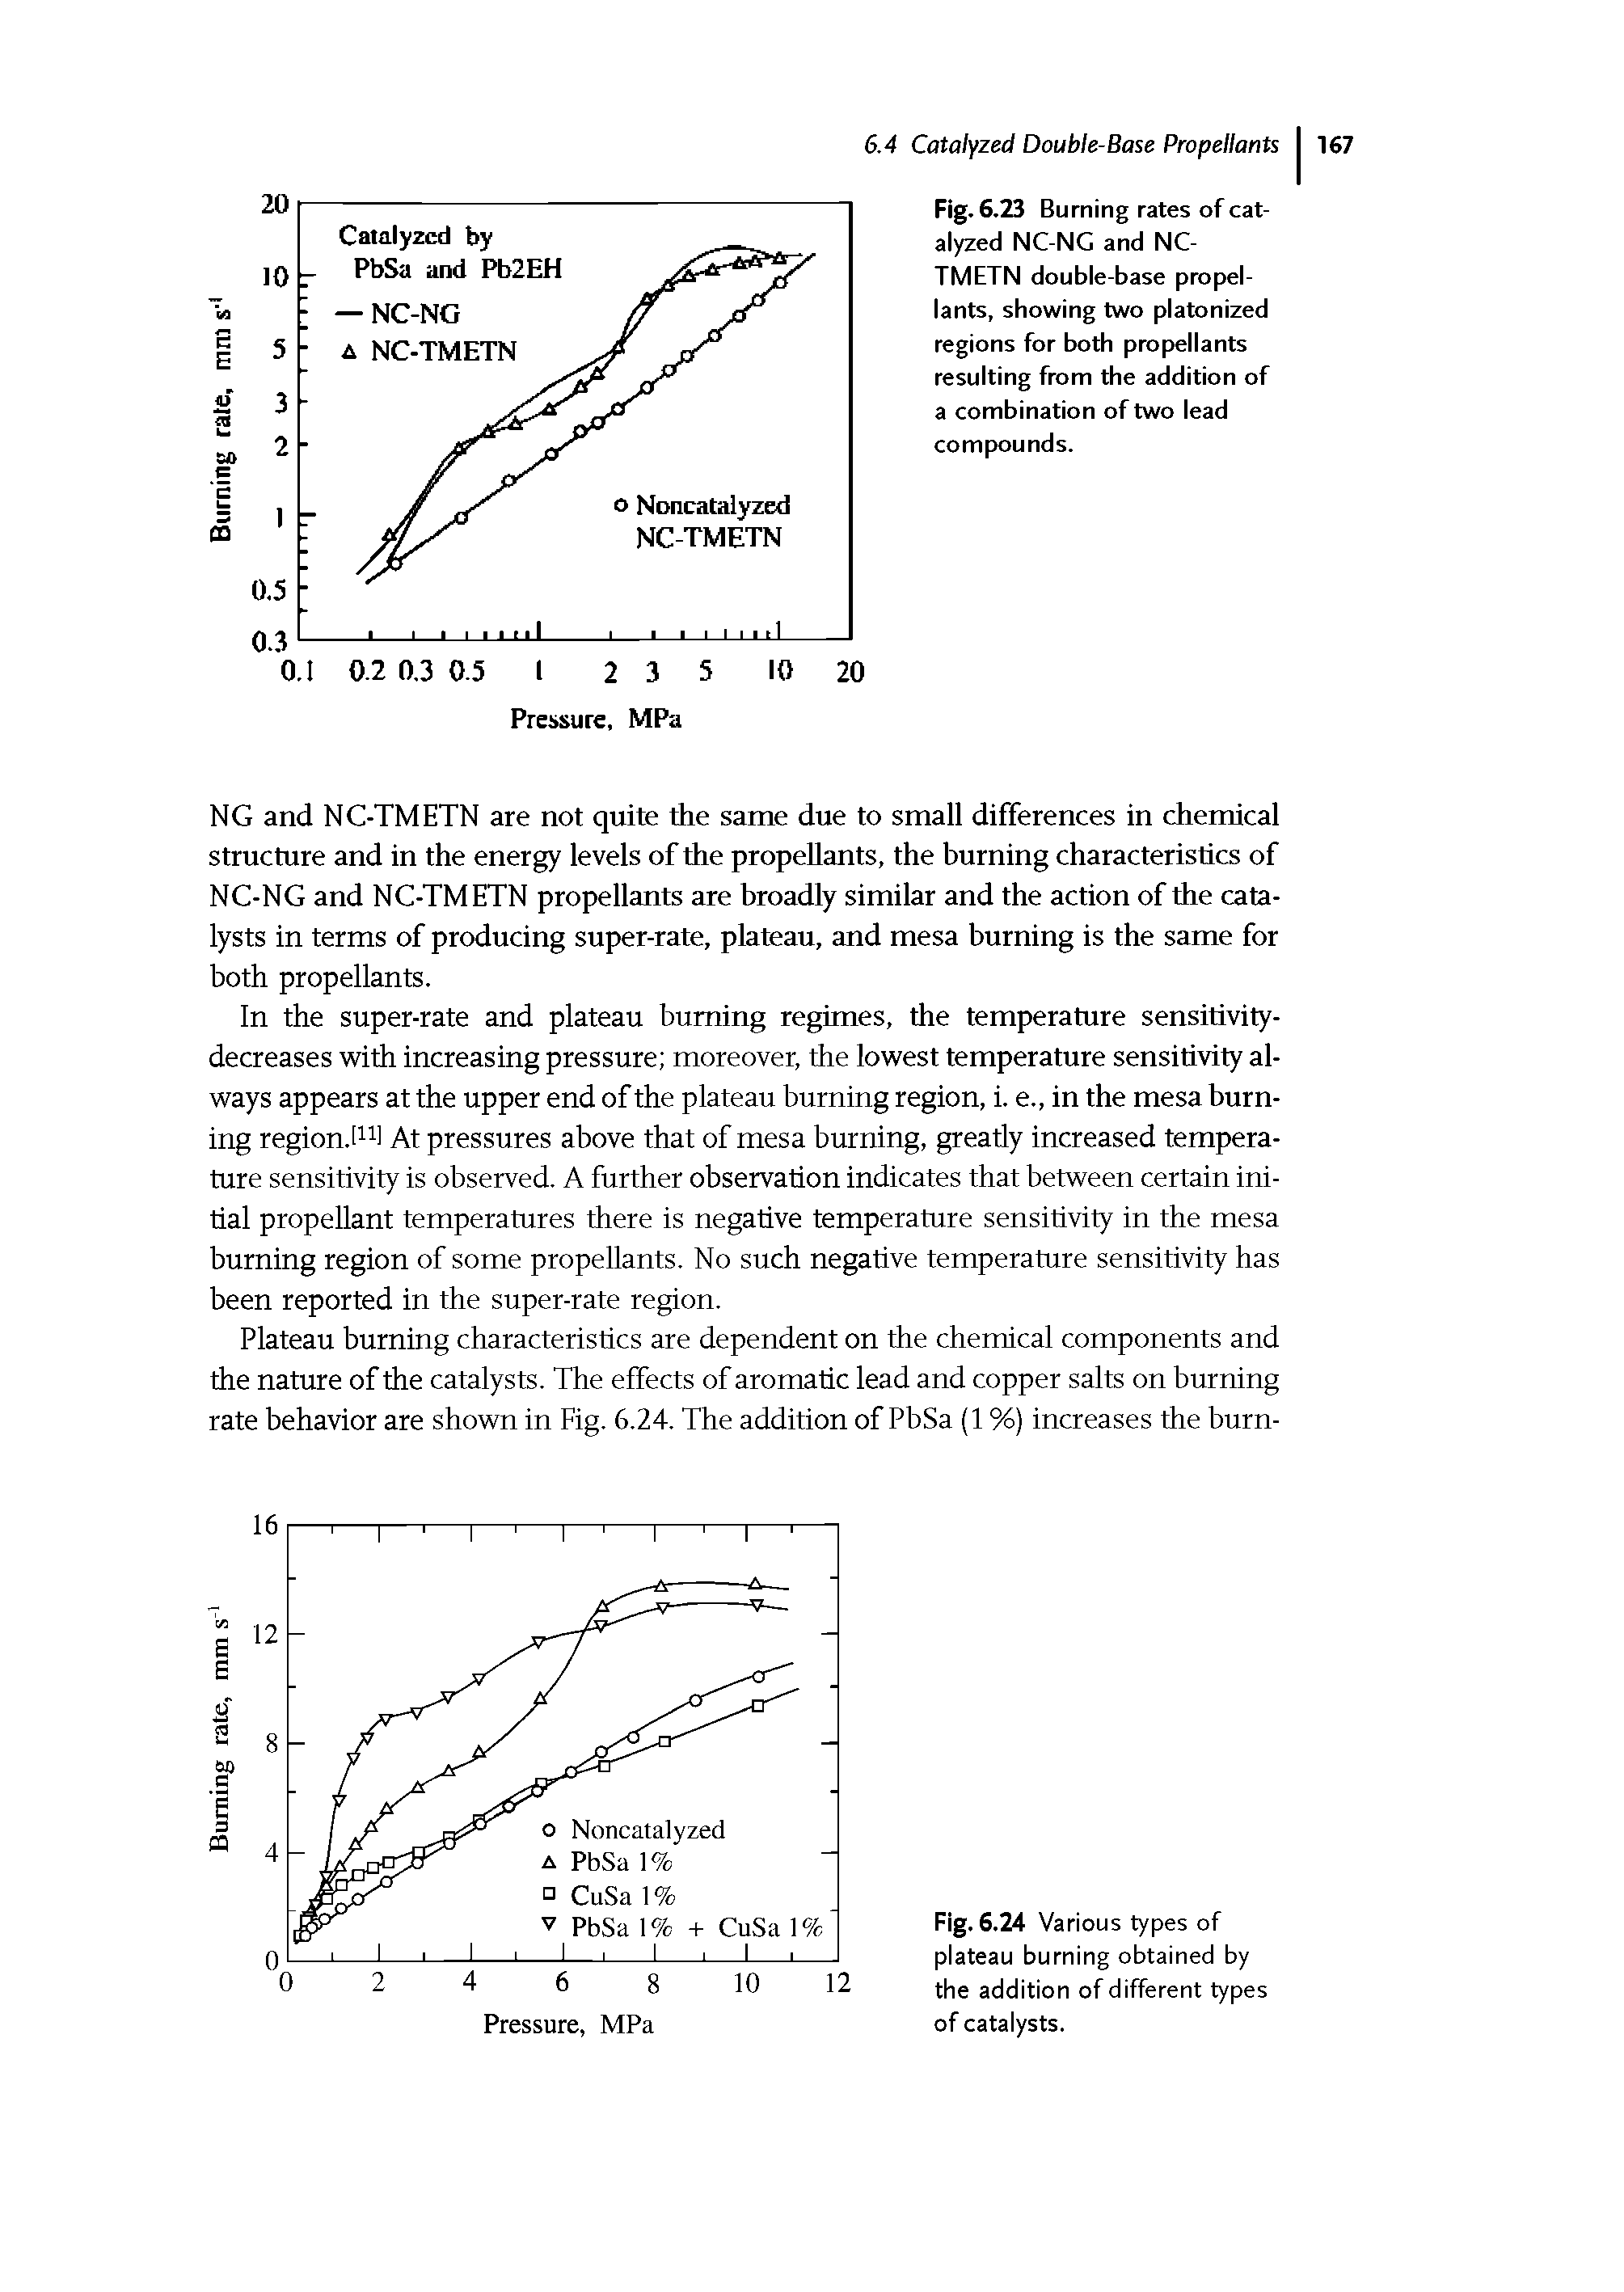 Fig. 6.23 Burning rates of catalyzed NC-NG and NC-TMETN double-base propellants, showing two platonized regions for both propellants resulting from the addition of a combination of two lead compounds.